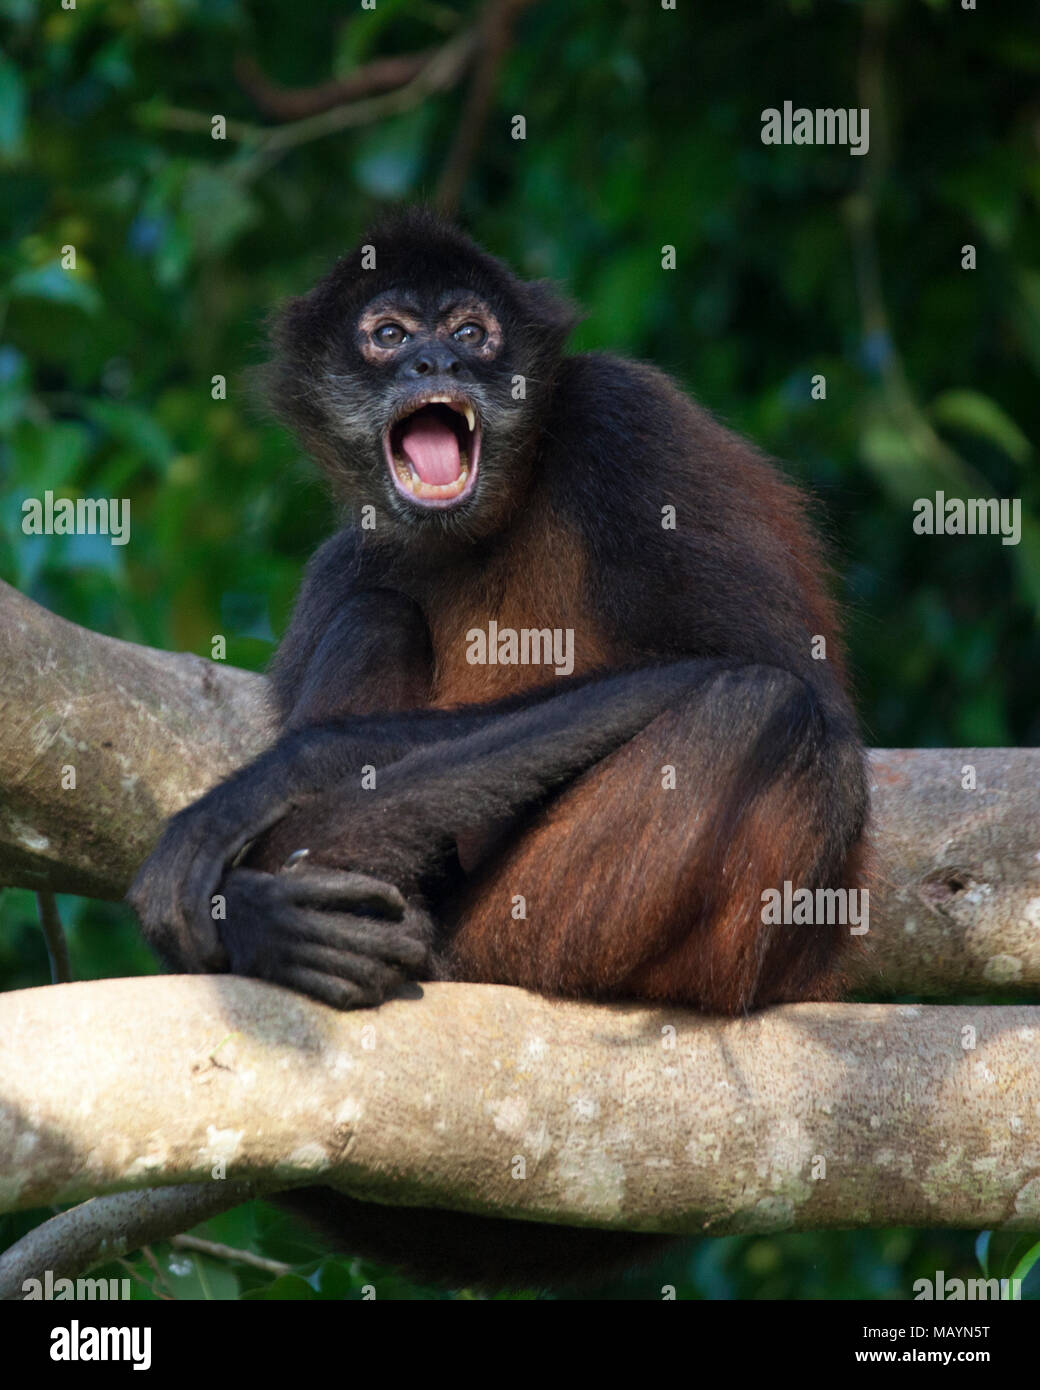 Black-handed Spider Monkey (Ateles geoffroyi) calling to other monkeys while sitting on a tree branch in the Costa Rican rainforest Stock Photo